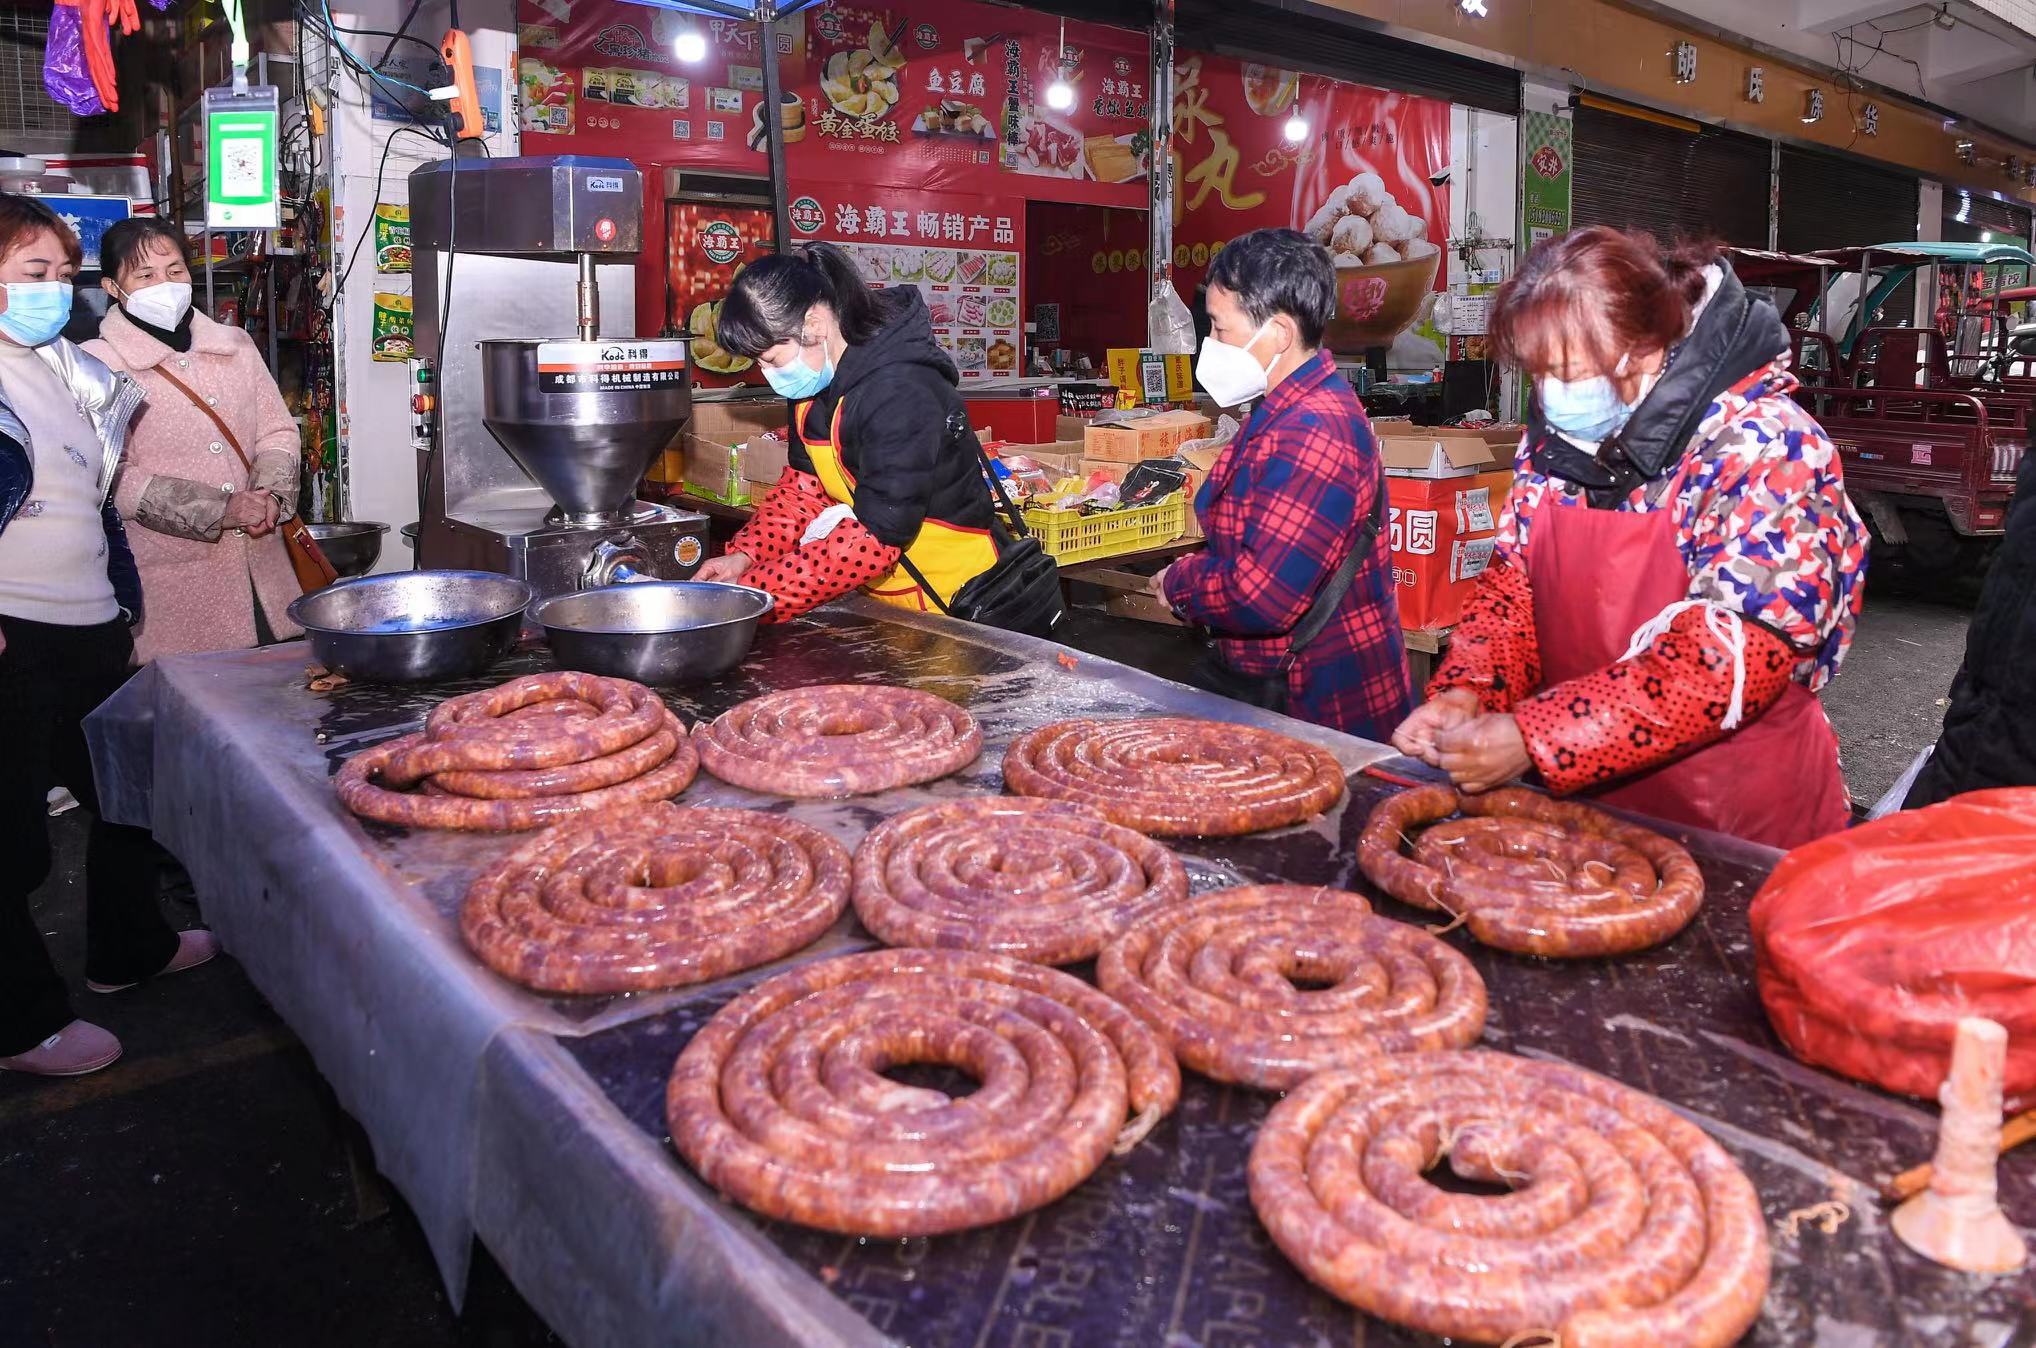 Vendors make and air cure sausages in Guang’an, Southwest China’s Sichuan Province on December 20, 2022. As the Spring Festival, which falls on January 22, approaches, special purchases for the holidays have been rising, adding to the festive and warm mood. Photo: VCG